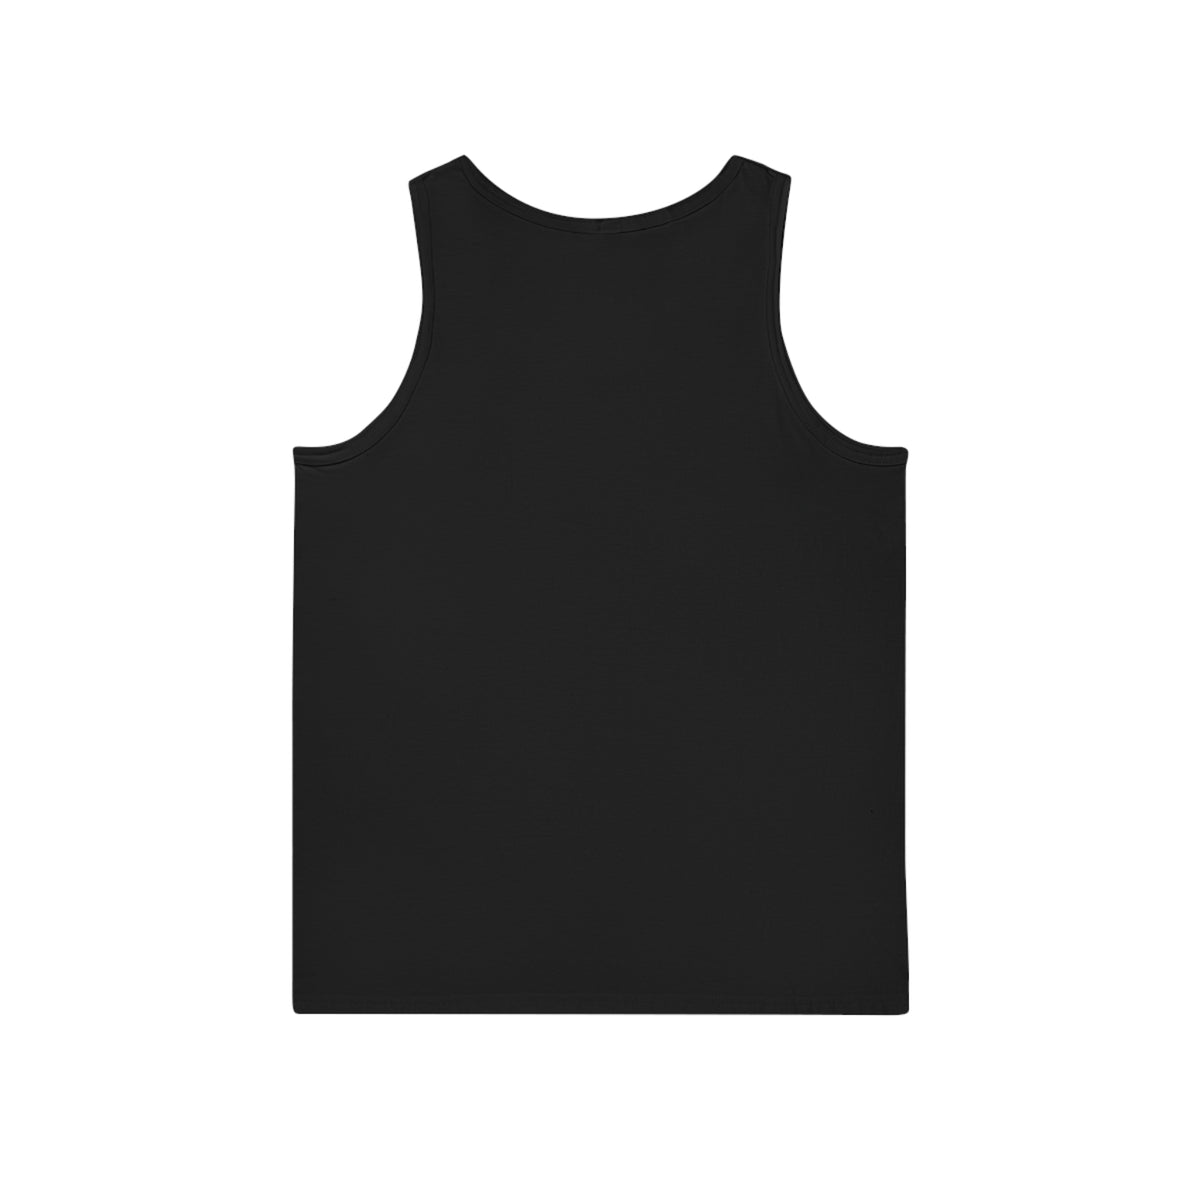 Unisex &quot;This is my Tang Top&quot; Tank Top Black